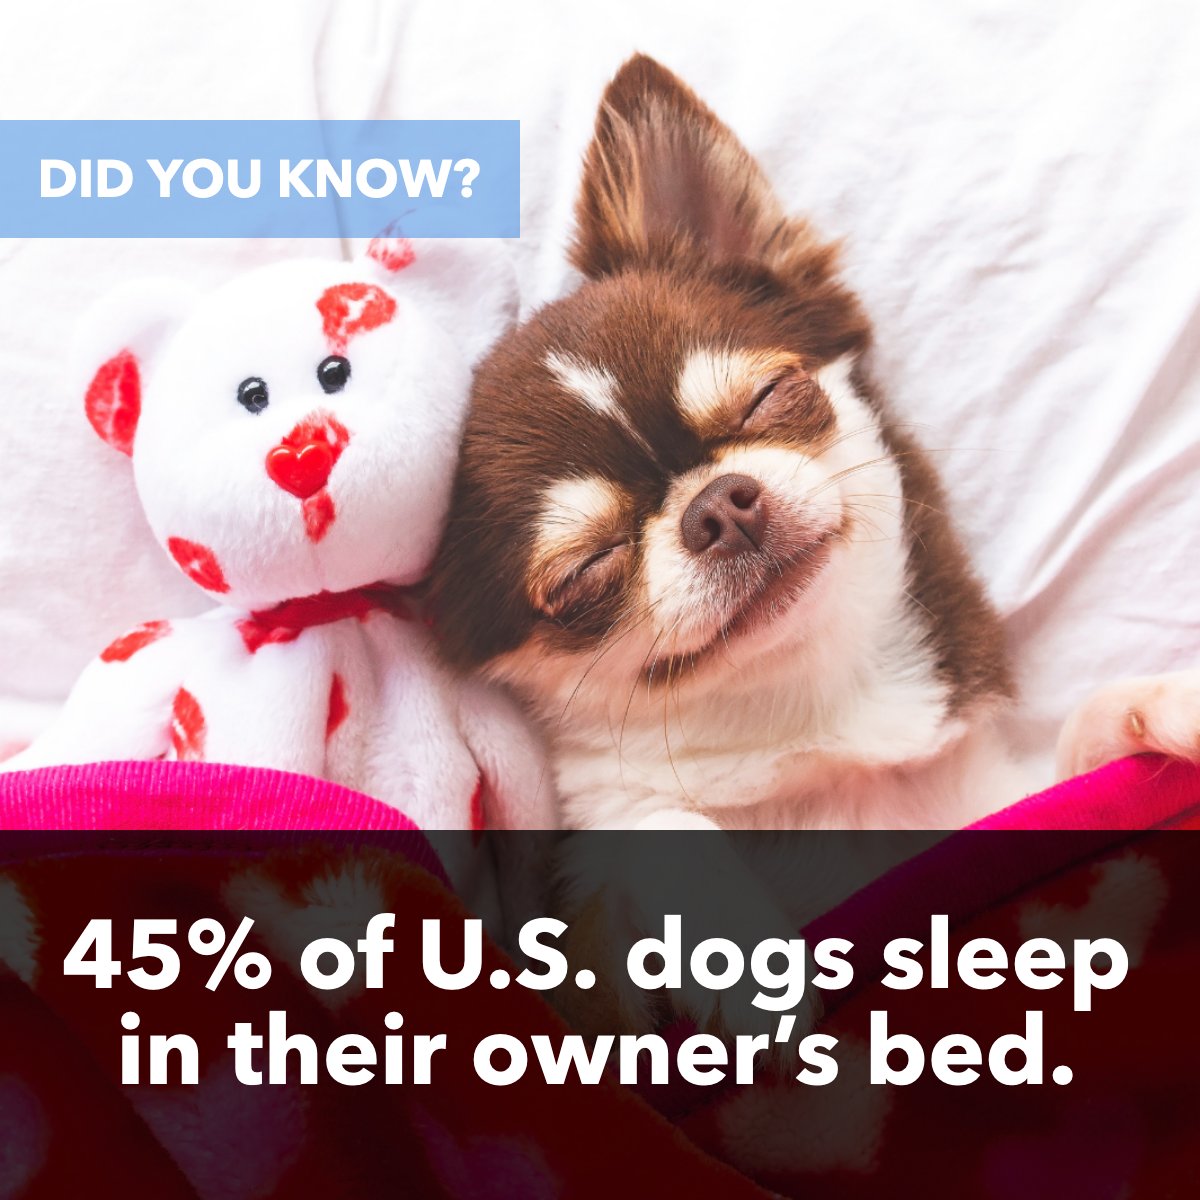 Or... Is the owner's bed actually the dog's bed and he just let us use it? 😅

#funfacts #dogfact #dogfacts #dogfactsoflife #pet #pets
 #hotharfordhomesforsale #findyourdreamhomenow #marylanddreamhomes #realestategoals #sellyourhomewithme #lovewhereyoulive